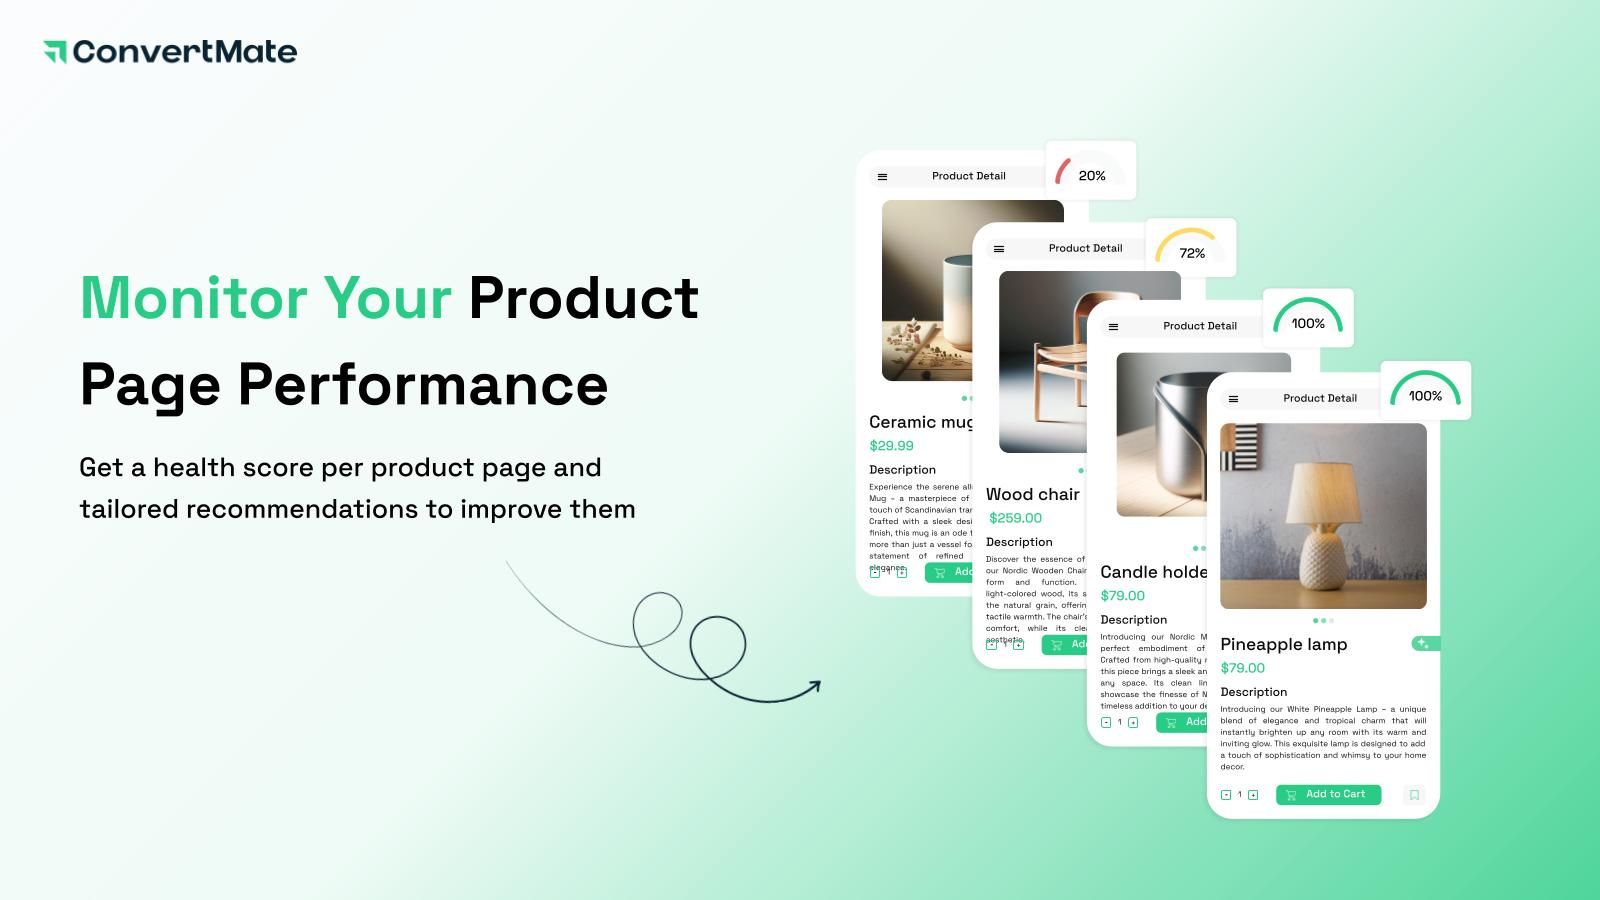 Get a health score per product page and tailored recommendations